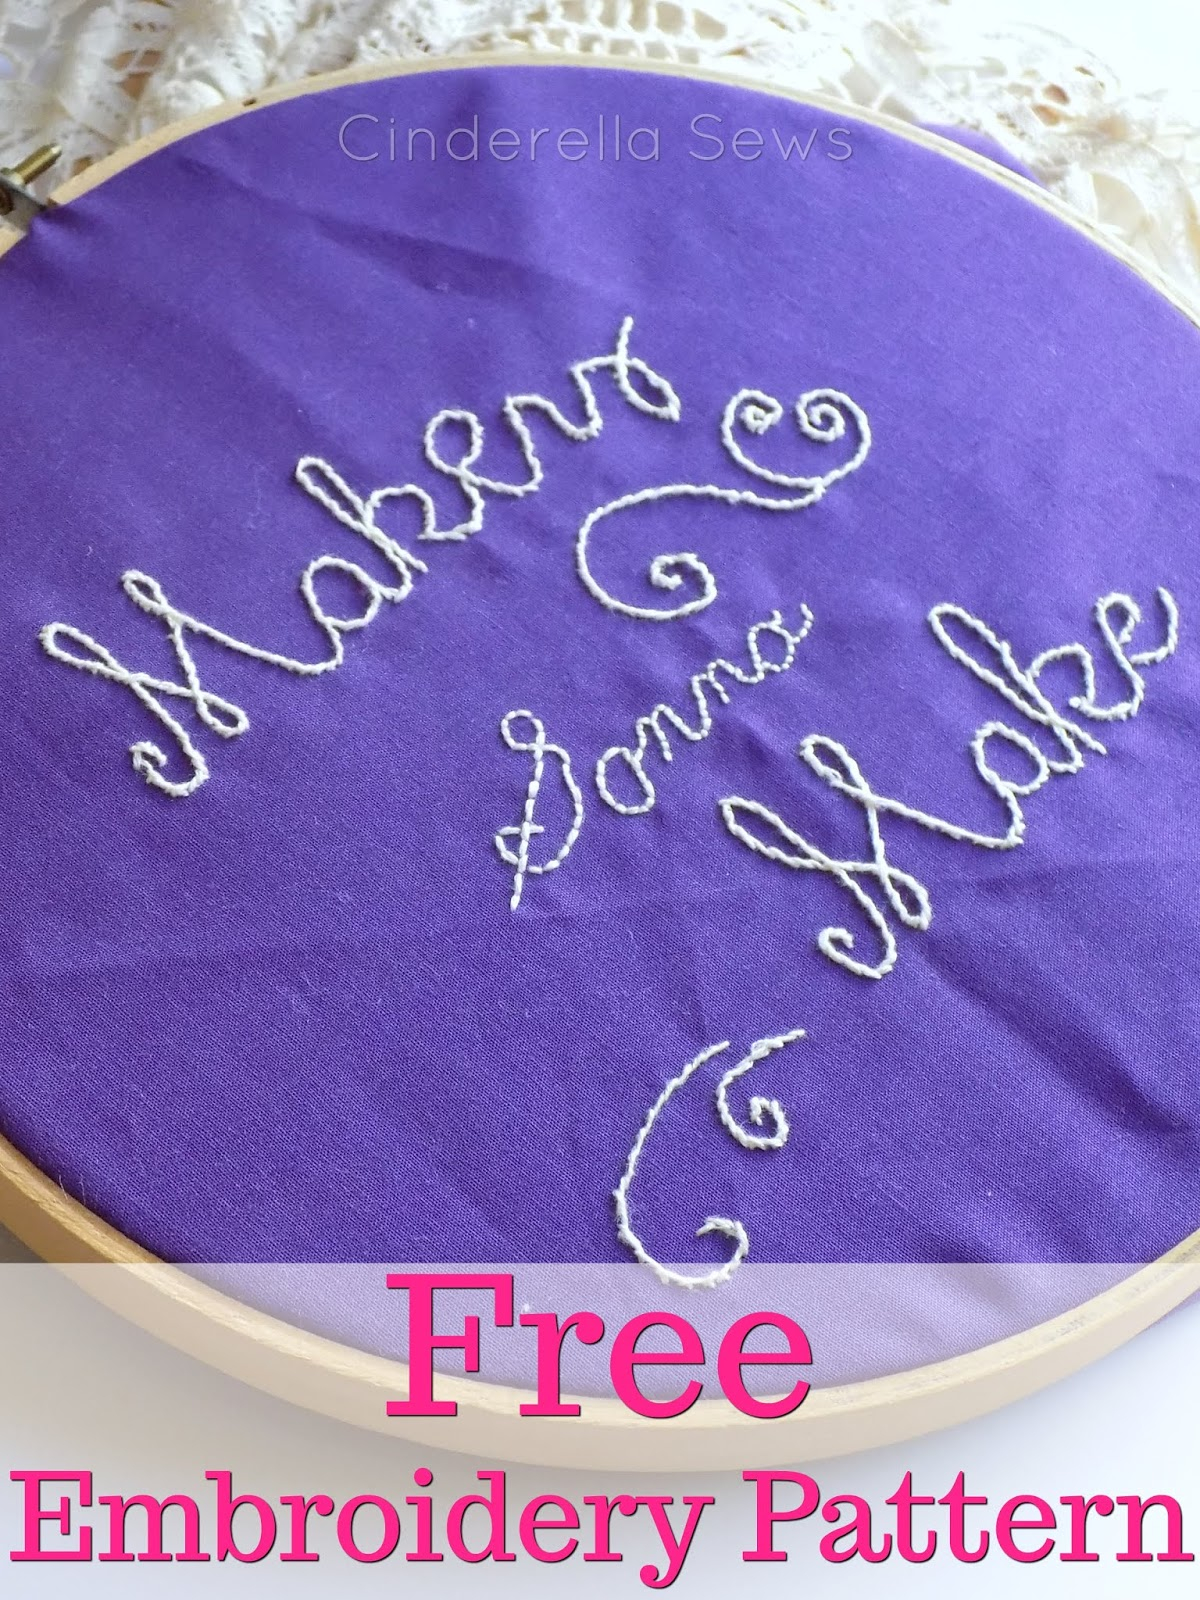 Make Embroidery Pattern Makers Gonna Make Embroidery Pattern